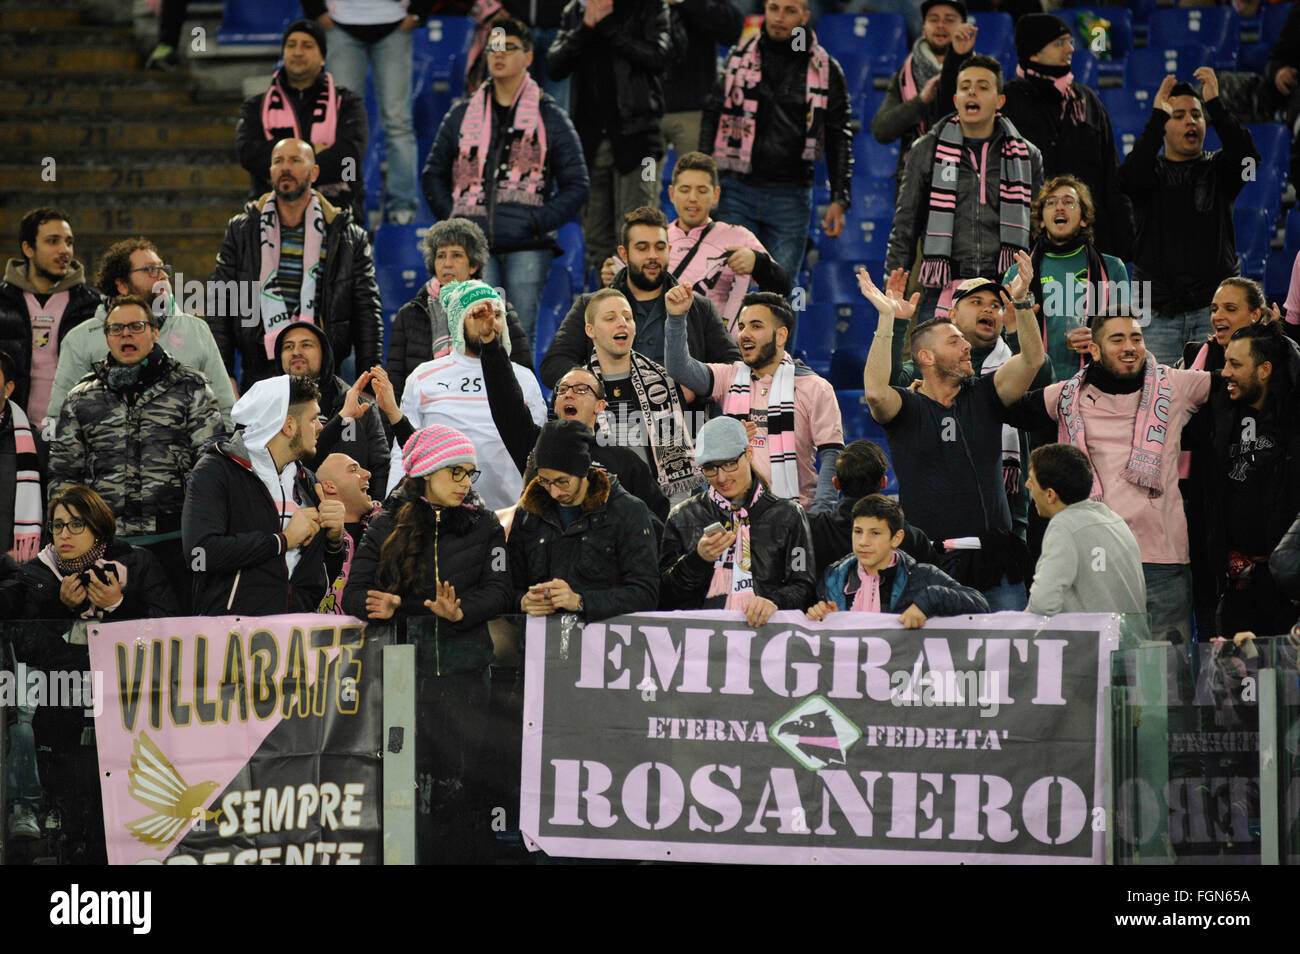 Euro Palermo Football Club Supporters